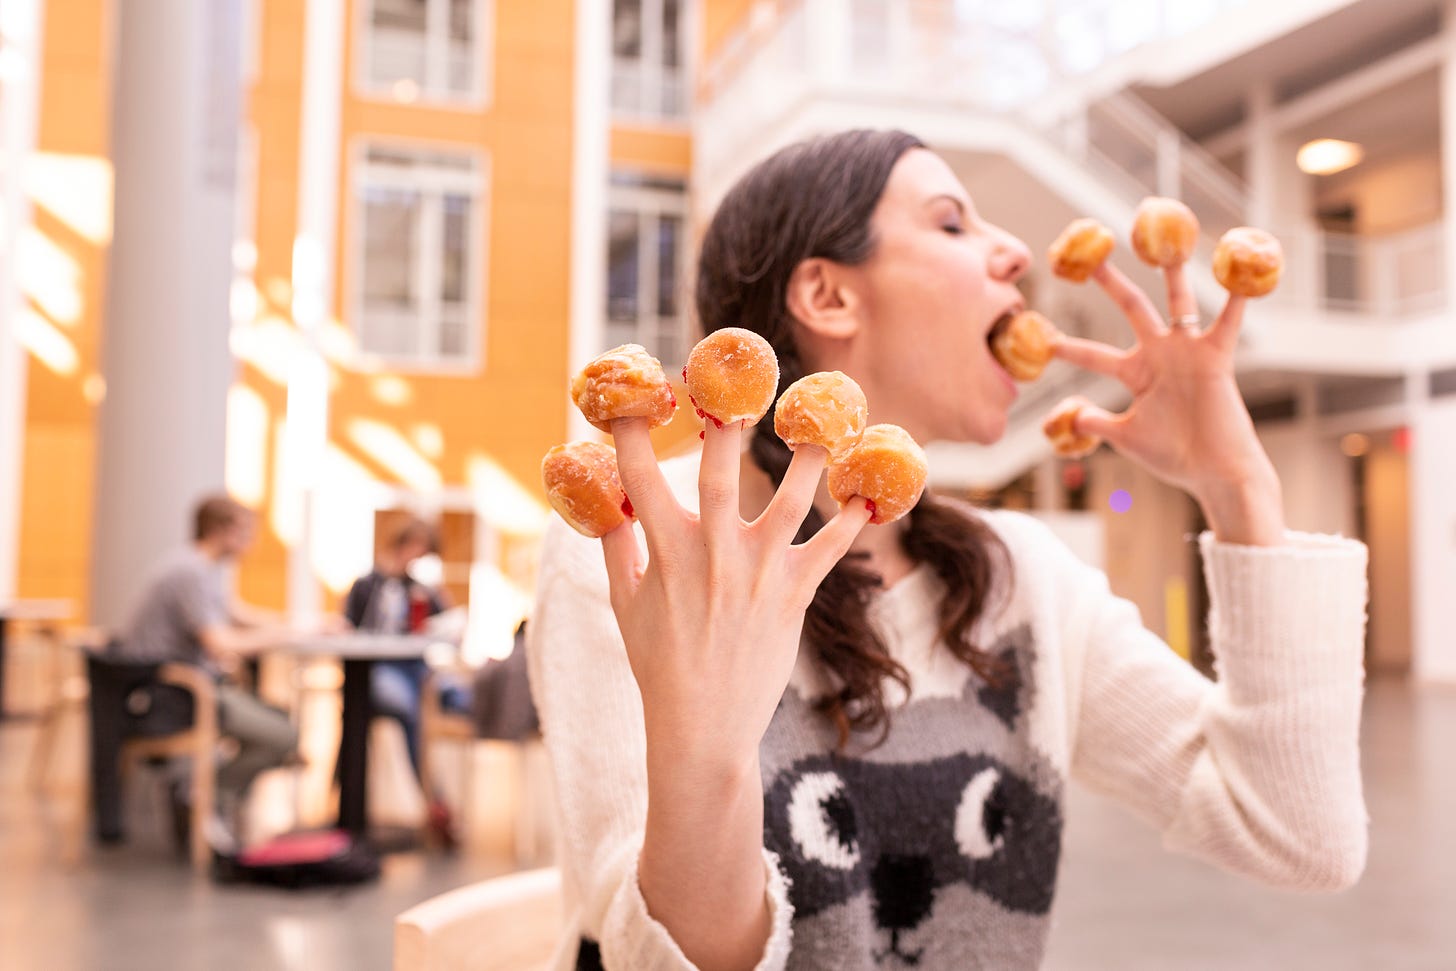 Girl in racoon sweater with donut holes on her fingers